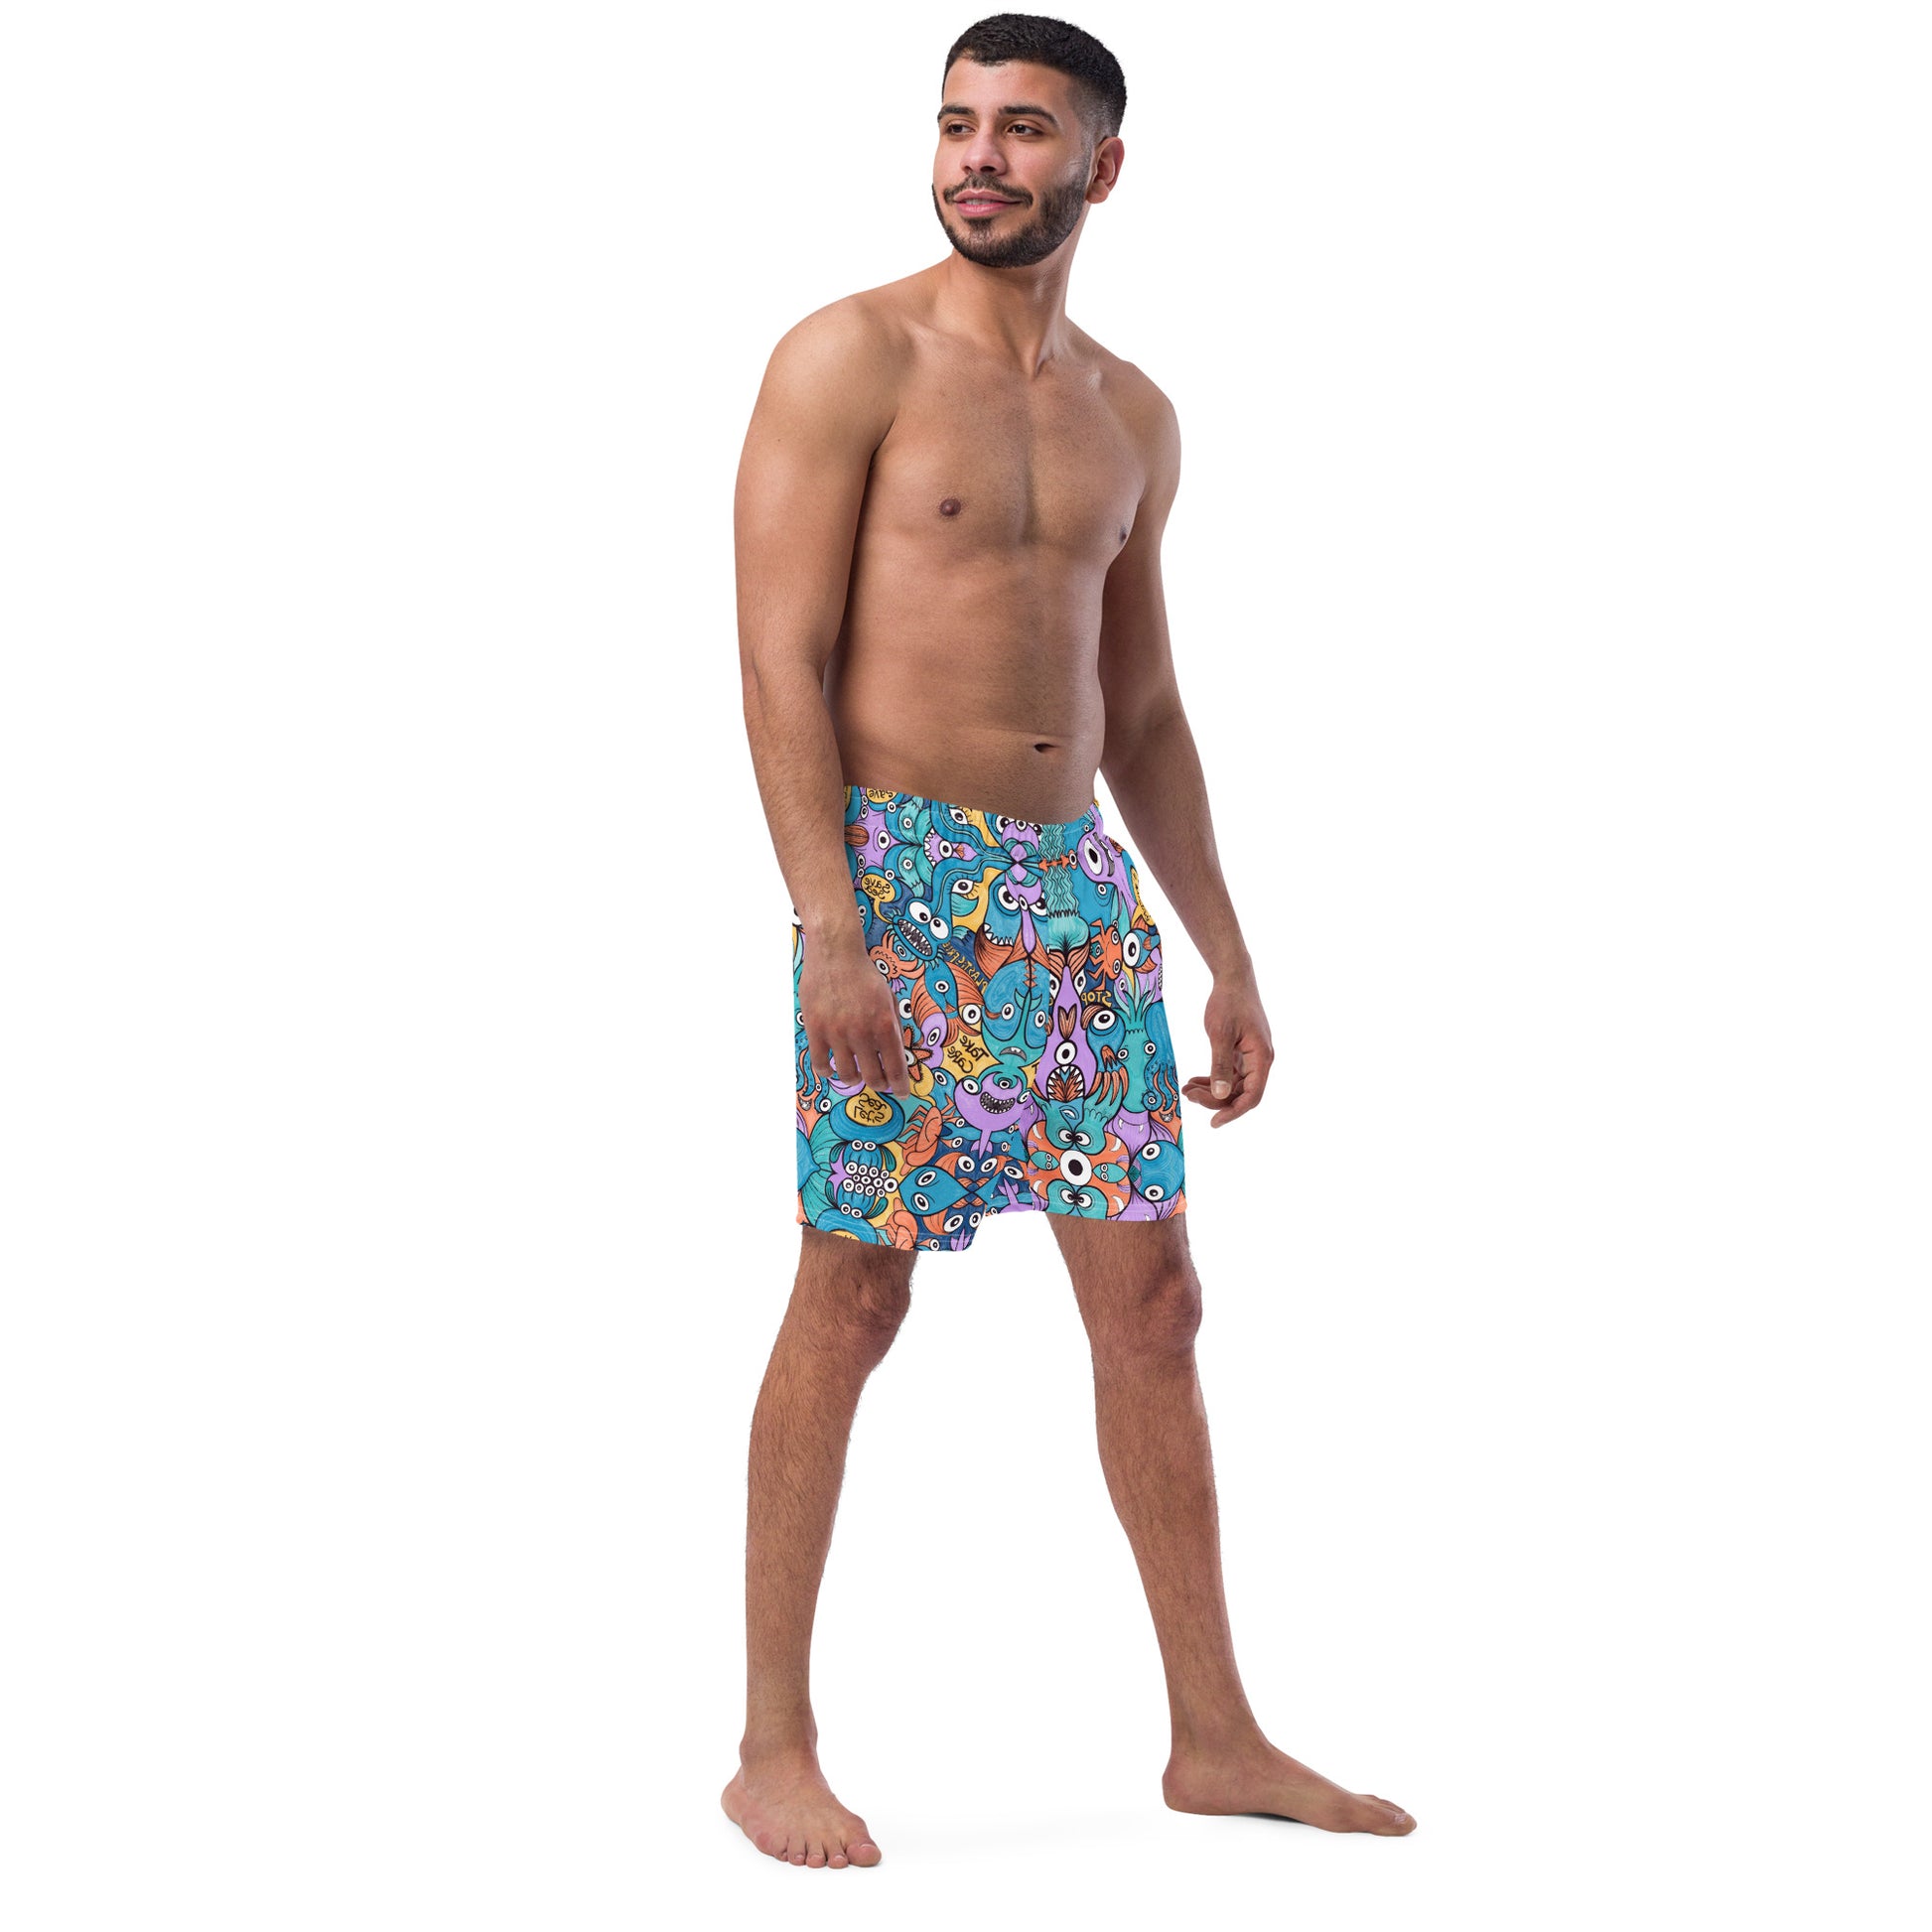 Young man wearing Men's swim trunks All-over printed with Wake up, time to take care of our sea